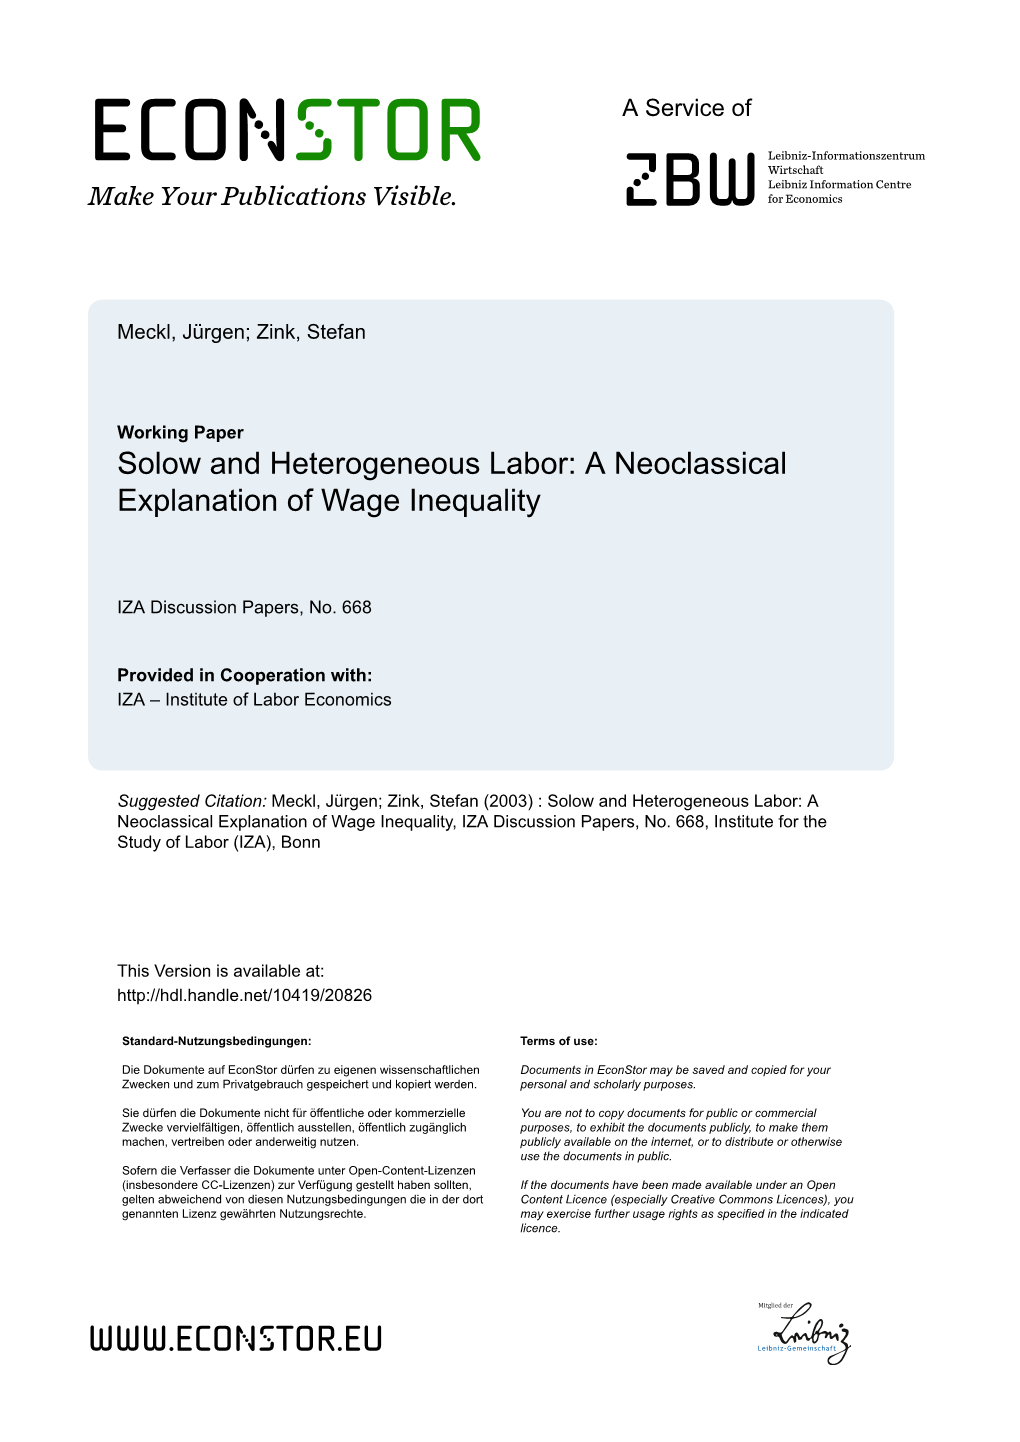 Solow and Heterogeneous Labor: a Neoclassical Explanation of Wage Inequality